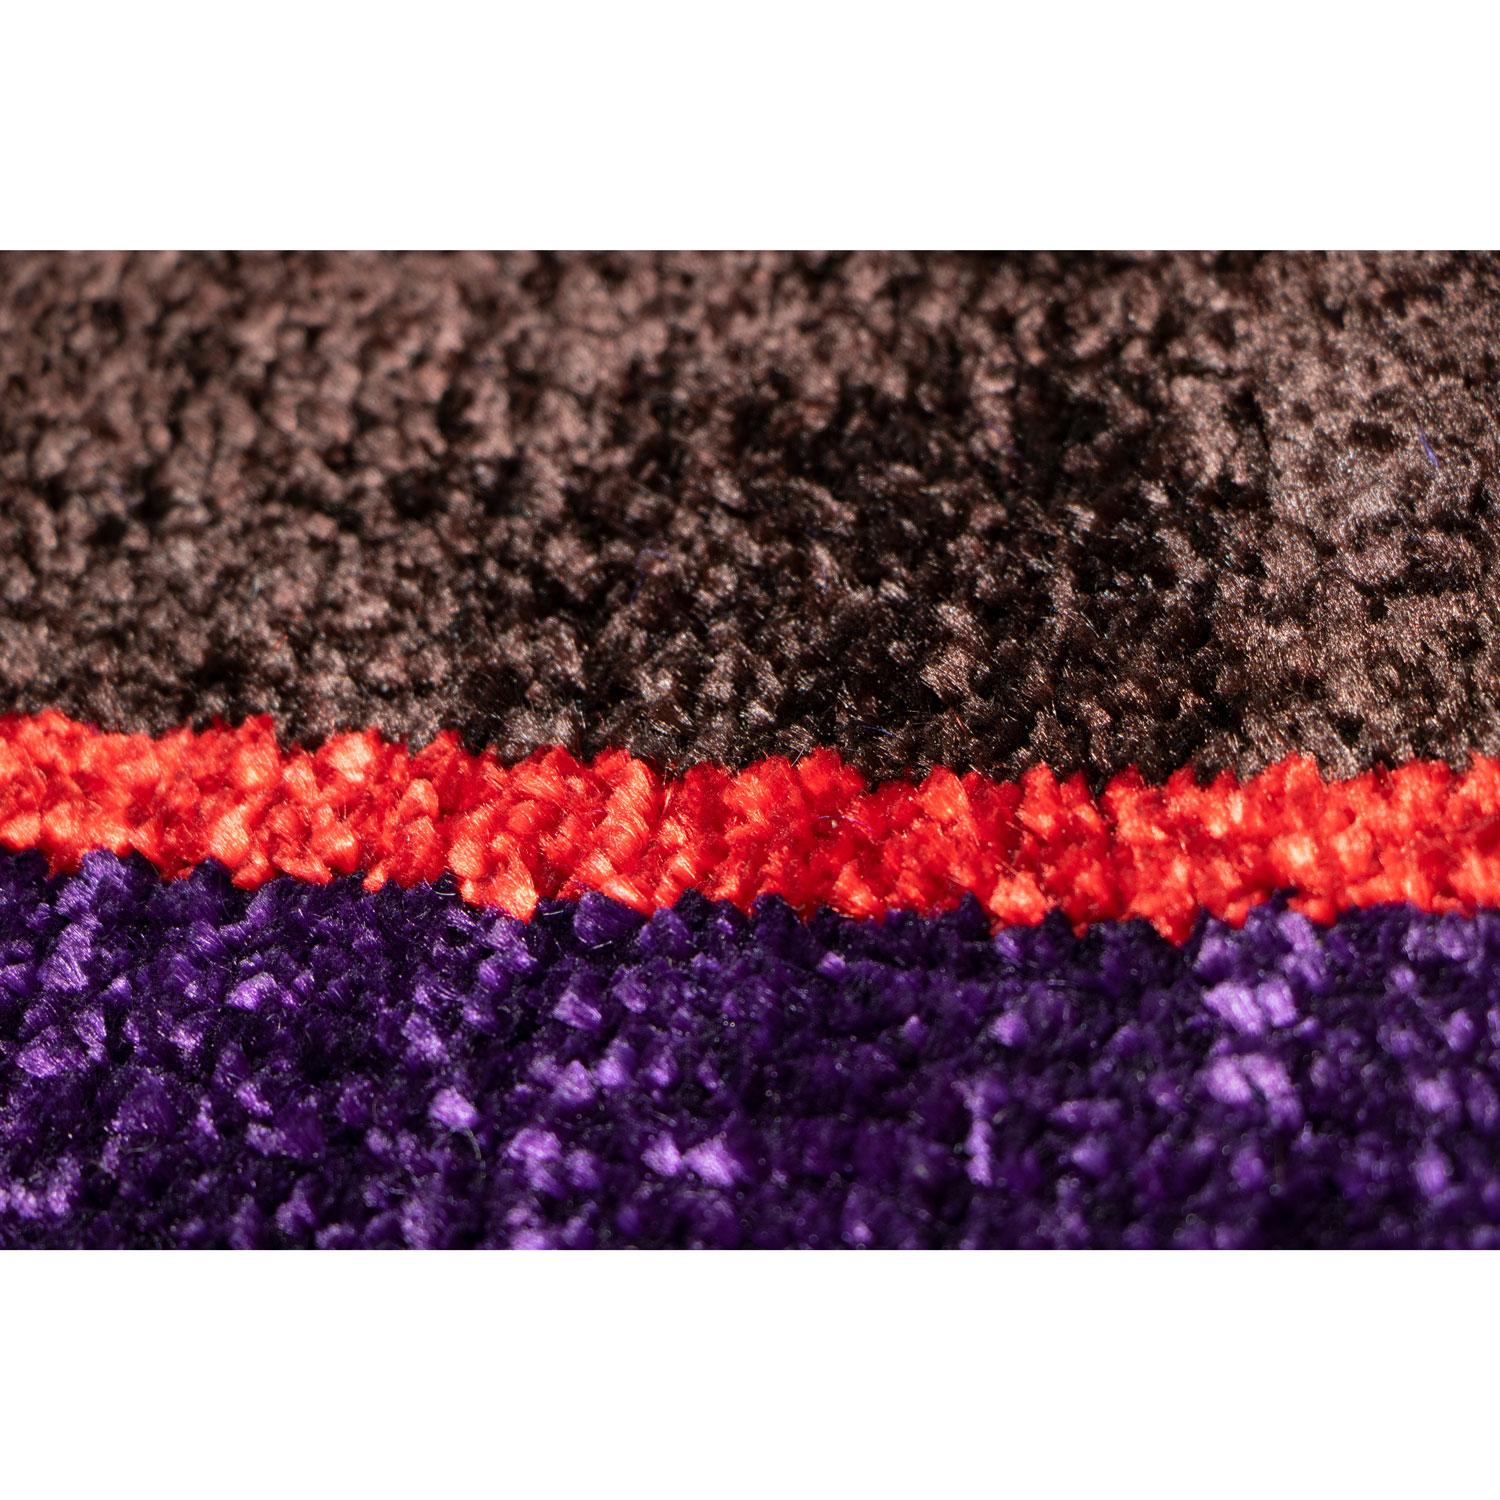 Indian 21st Cent Shiny Violet Brown Runner Rug by Deanna Comellini In Stock 60x200cm For Sale